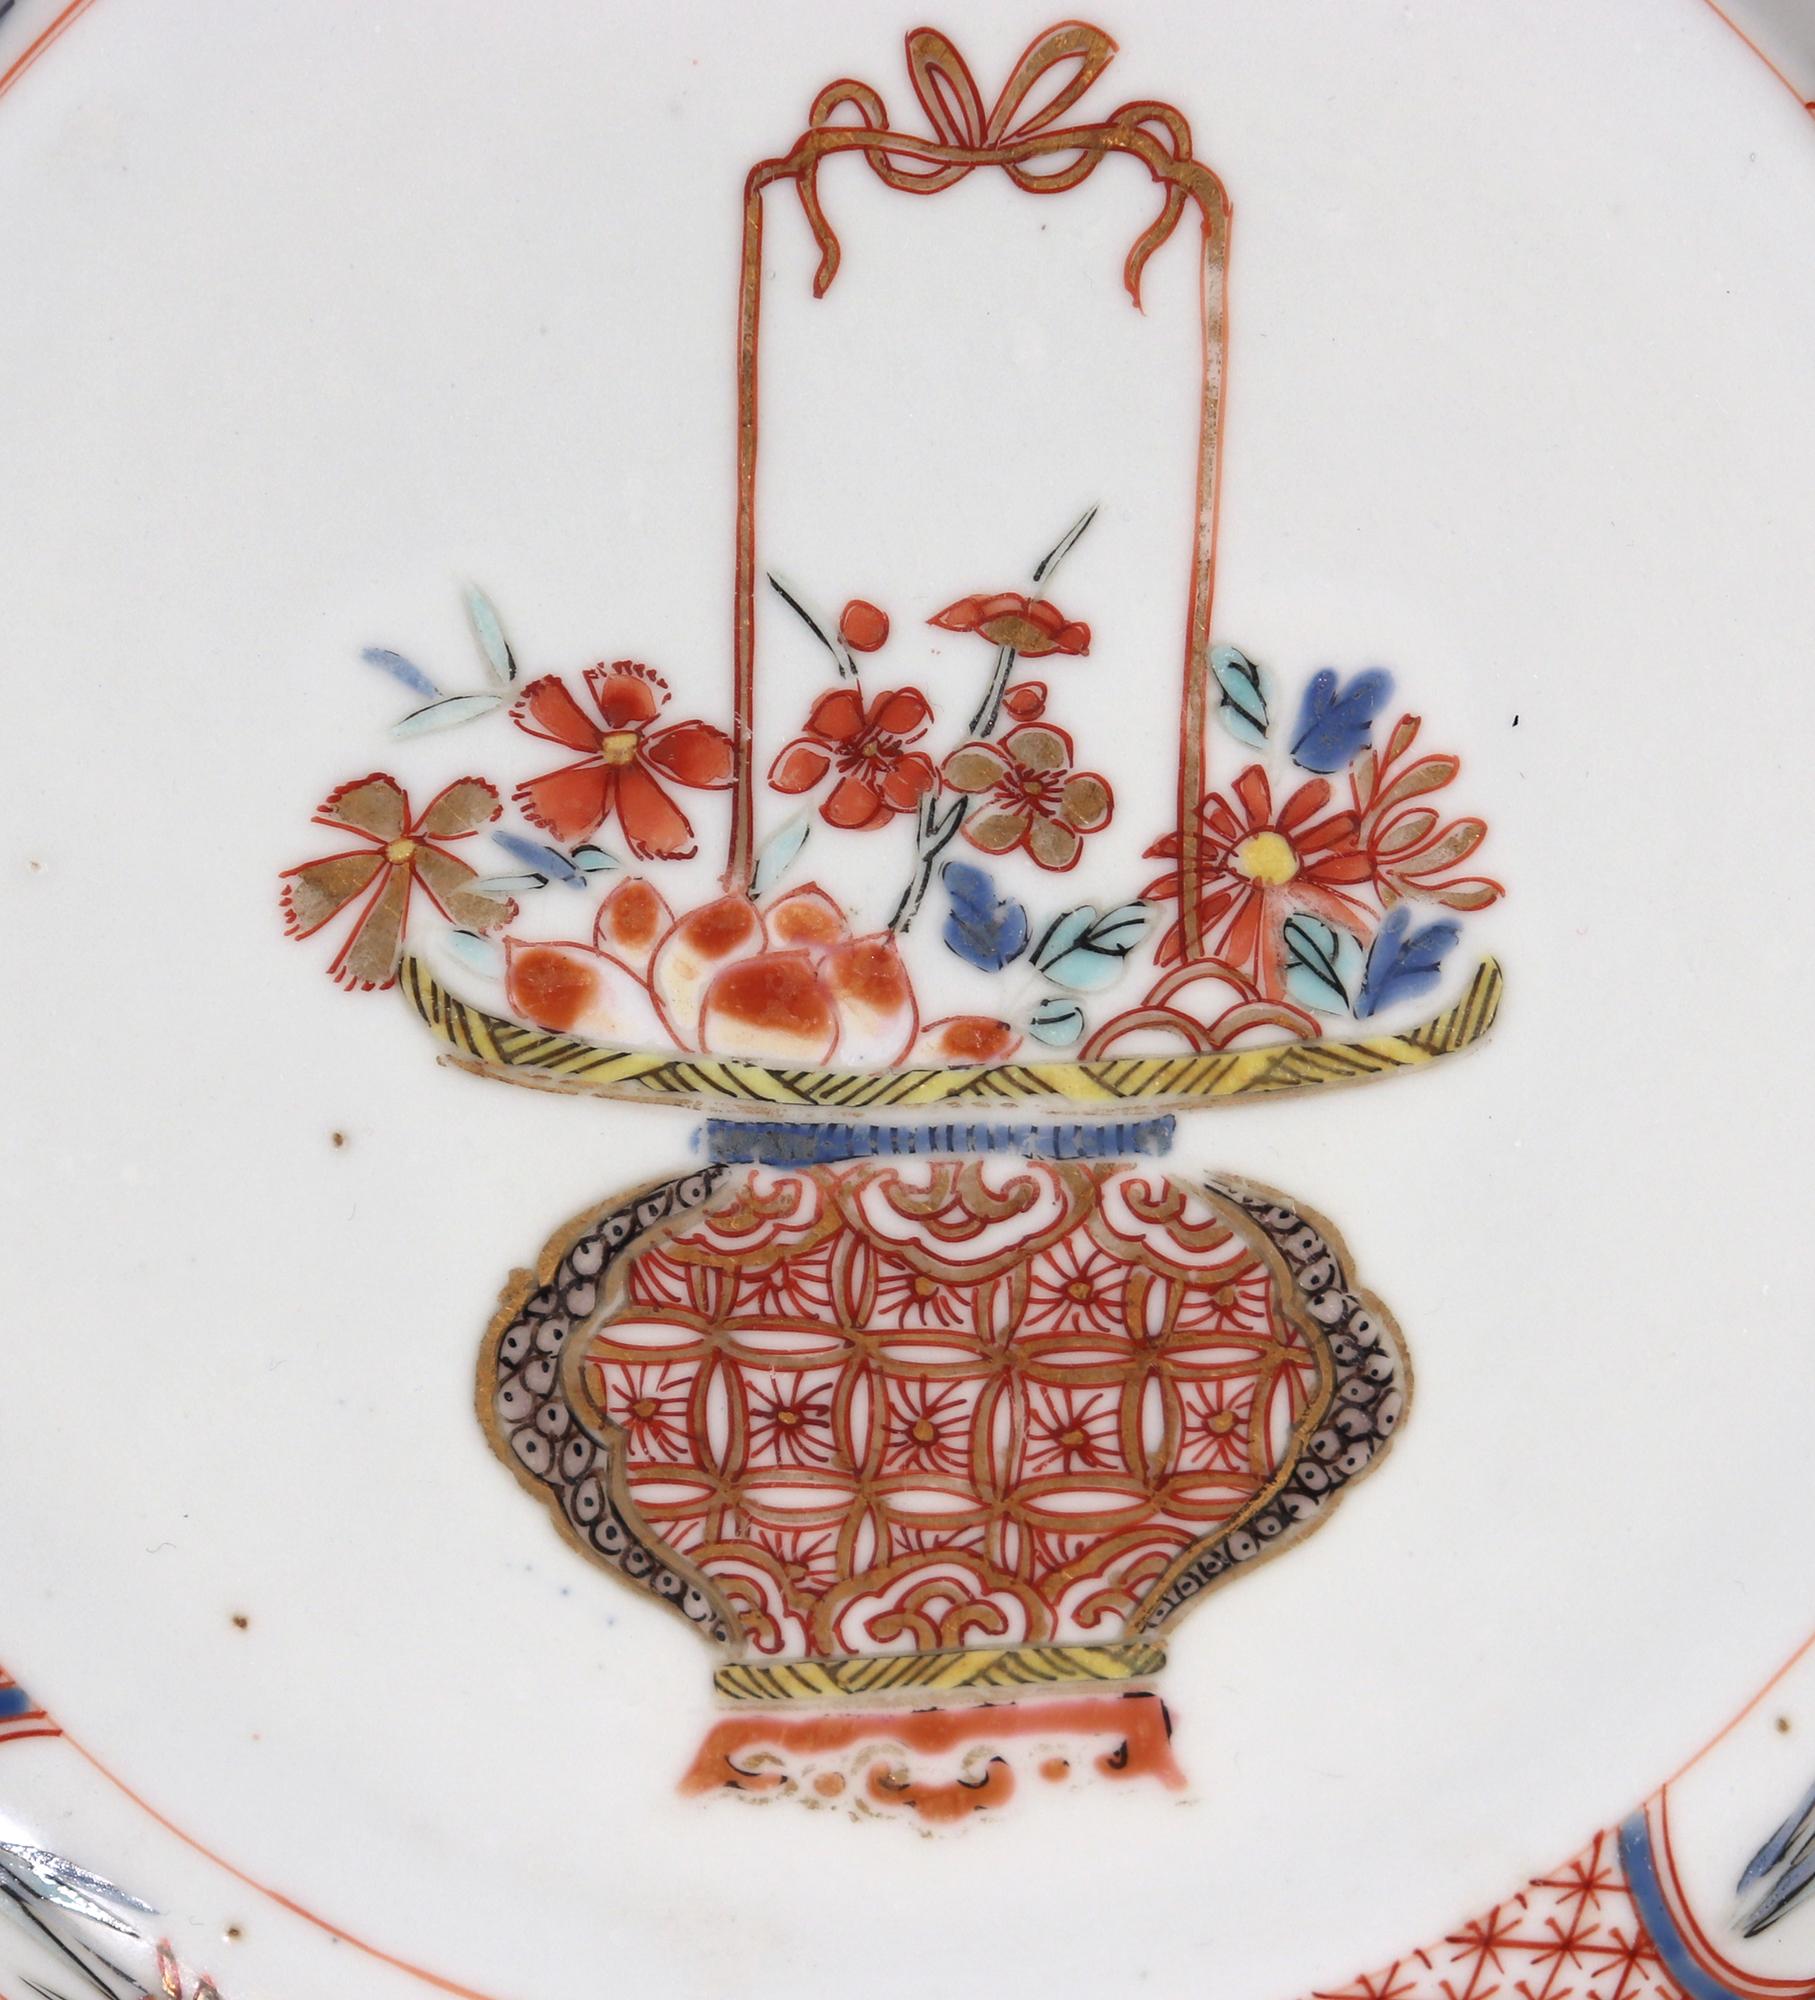 Chinese Export Porcelain Famille Rose-Verte Plates Painted with A Flower Basket For Sale 4